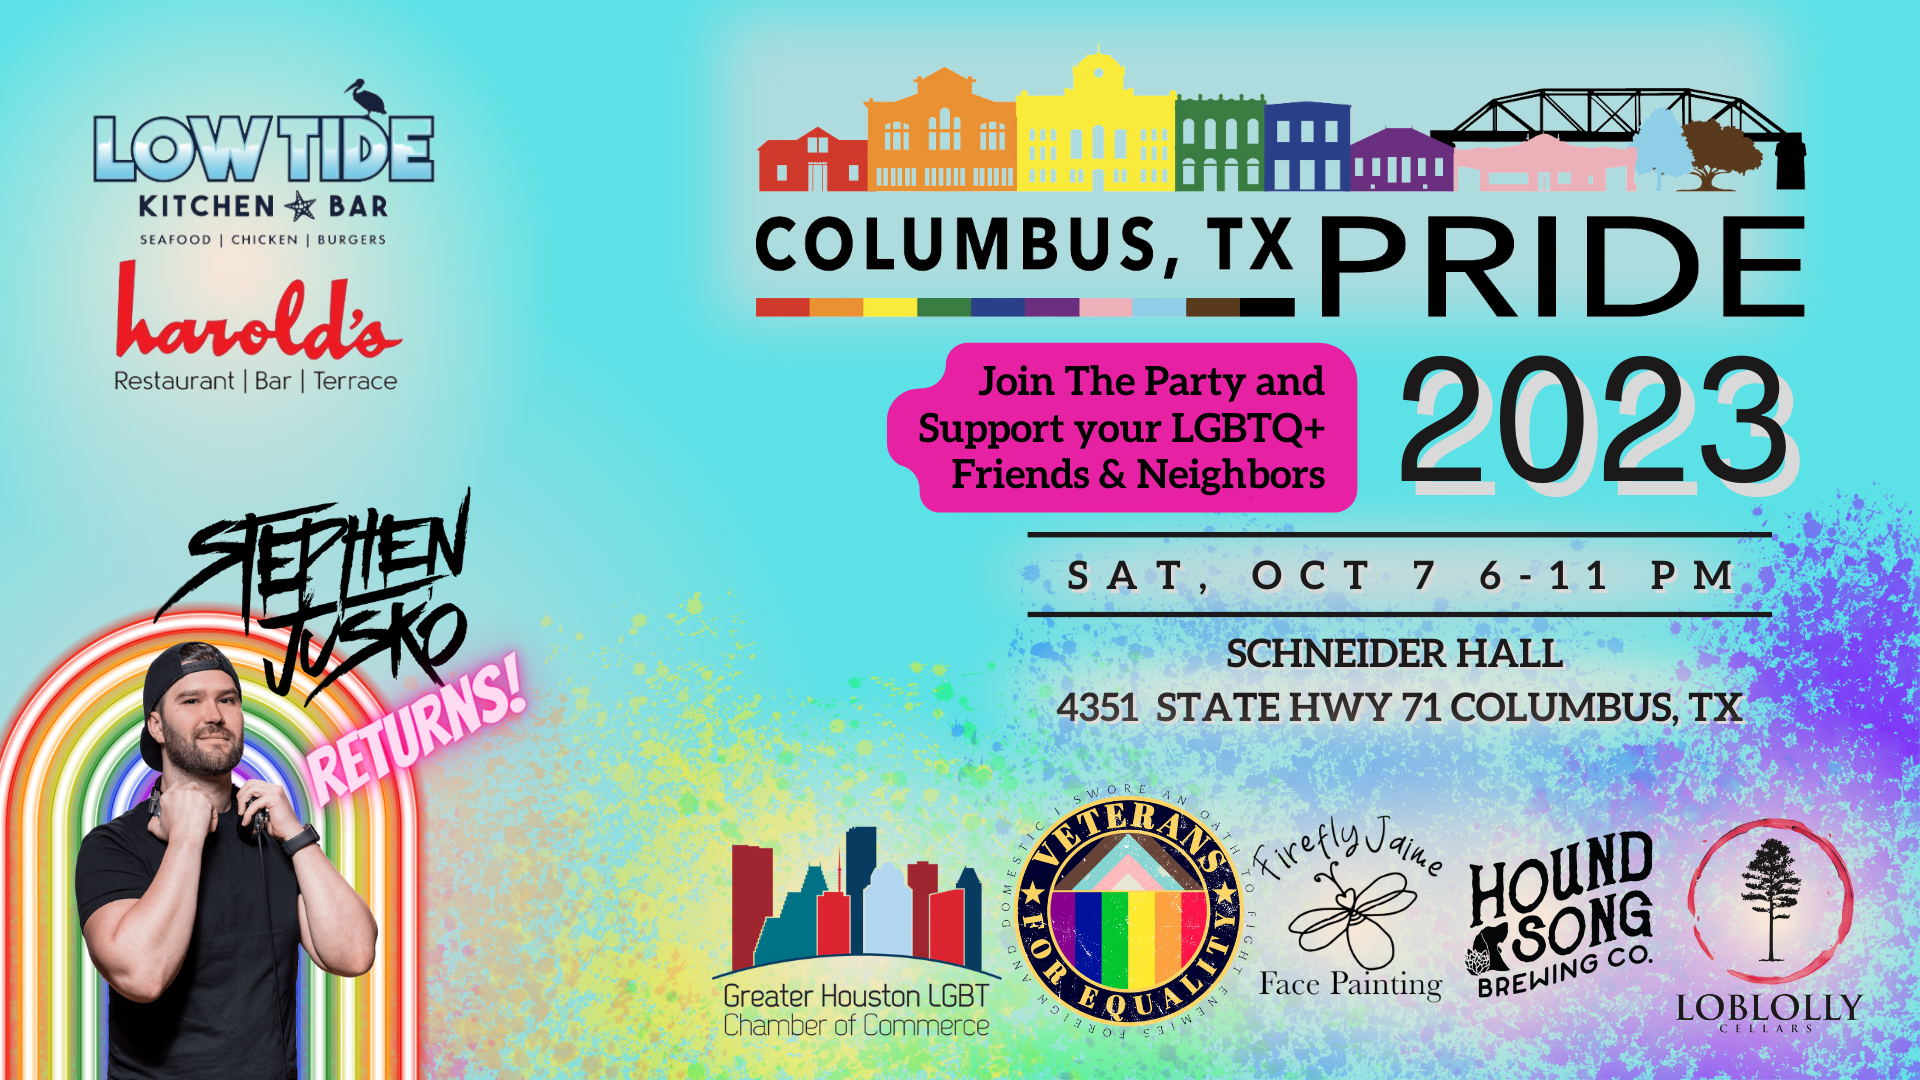 Join Us for the 3rd Annual Columbus, TX PRIDE! Greater Houston LGBT